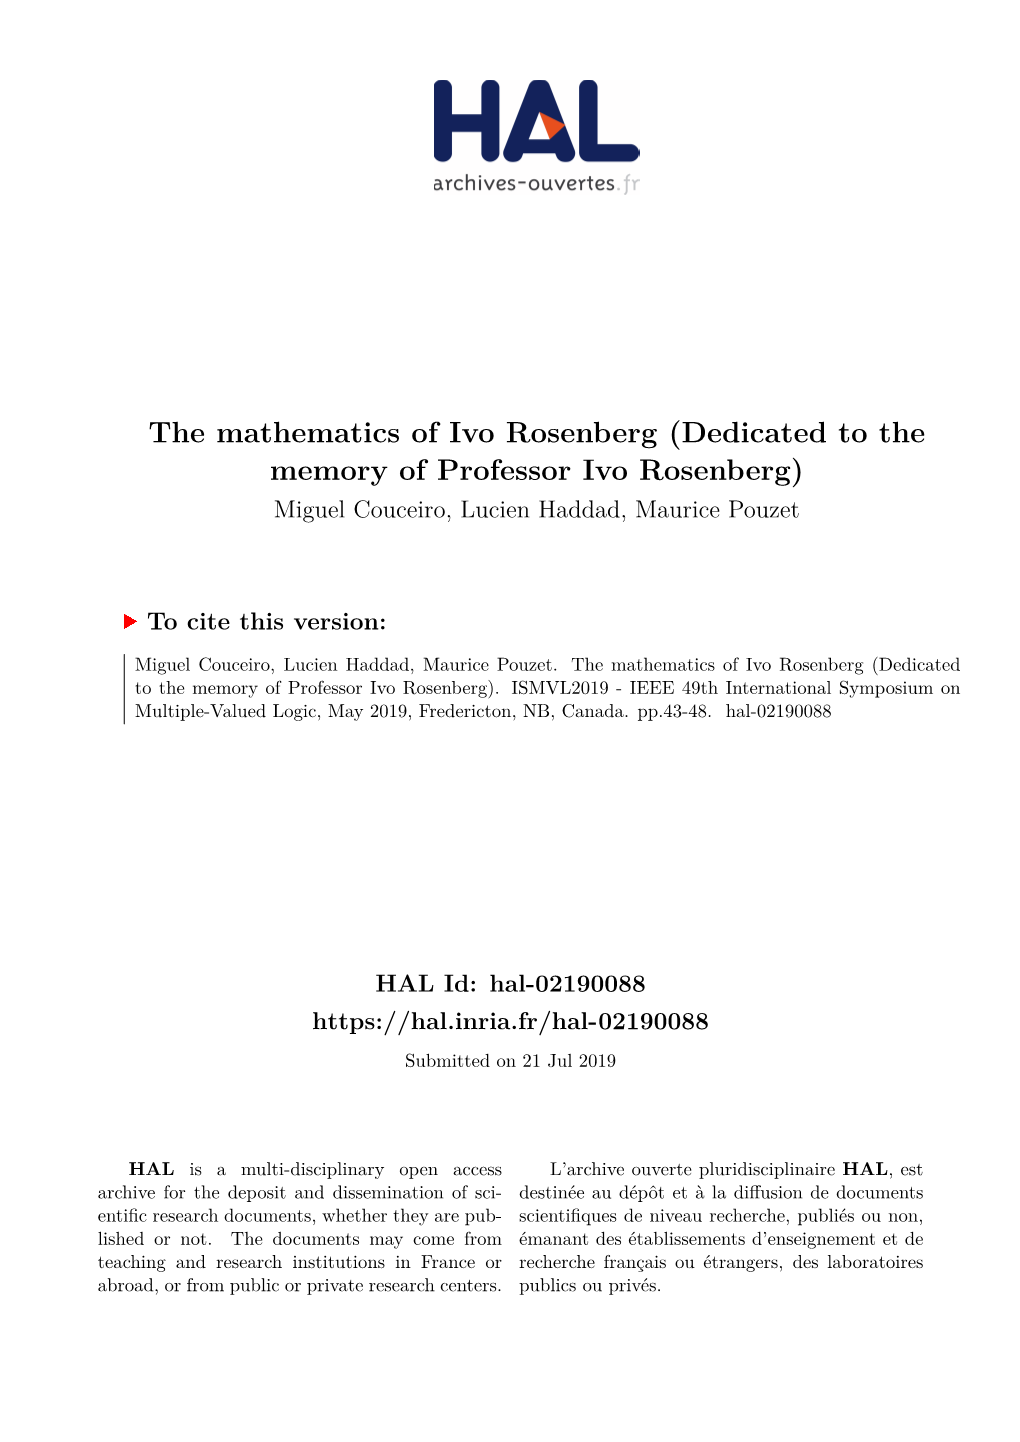 The Mathematics of Ivo Rosenberg (Dedicated to the Memory of Professor Ivo Rosenberg) Miguel Couceiro, Lucien Haddad, Maurice Pouzet